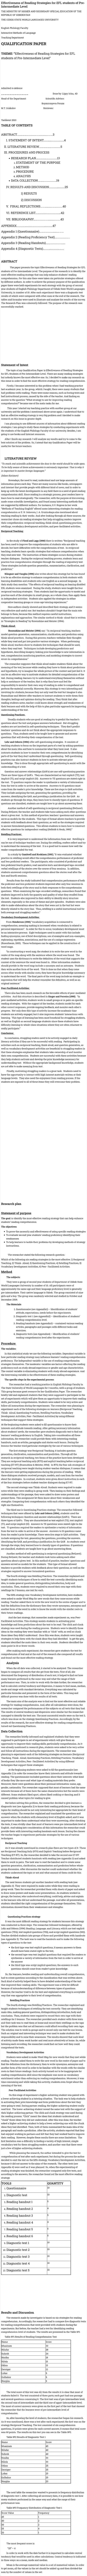 Effectiveness of Reading Strategies for EFL students of Pre-Intermediate Level